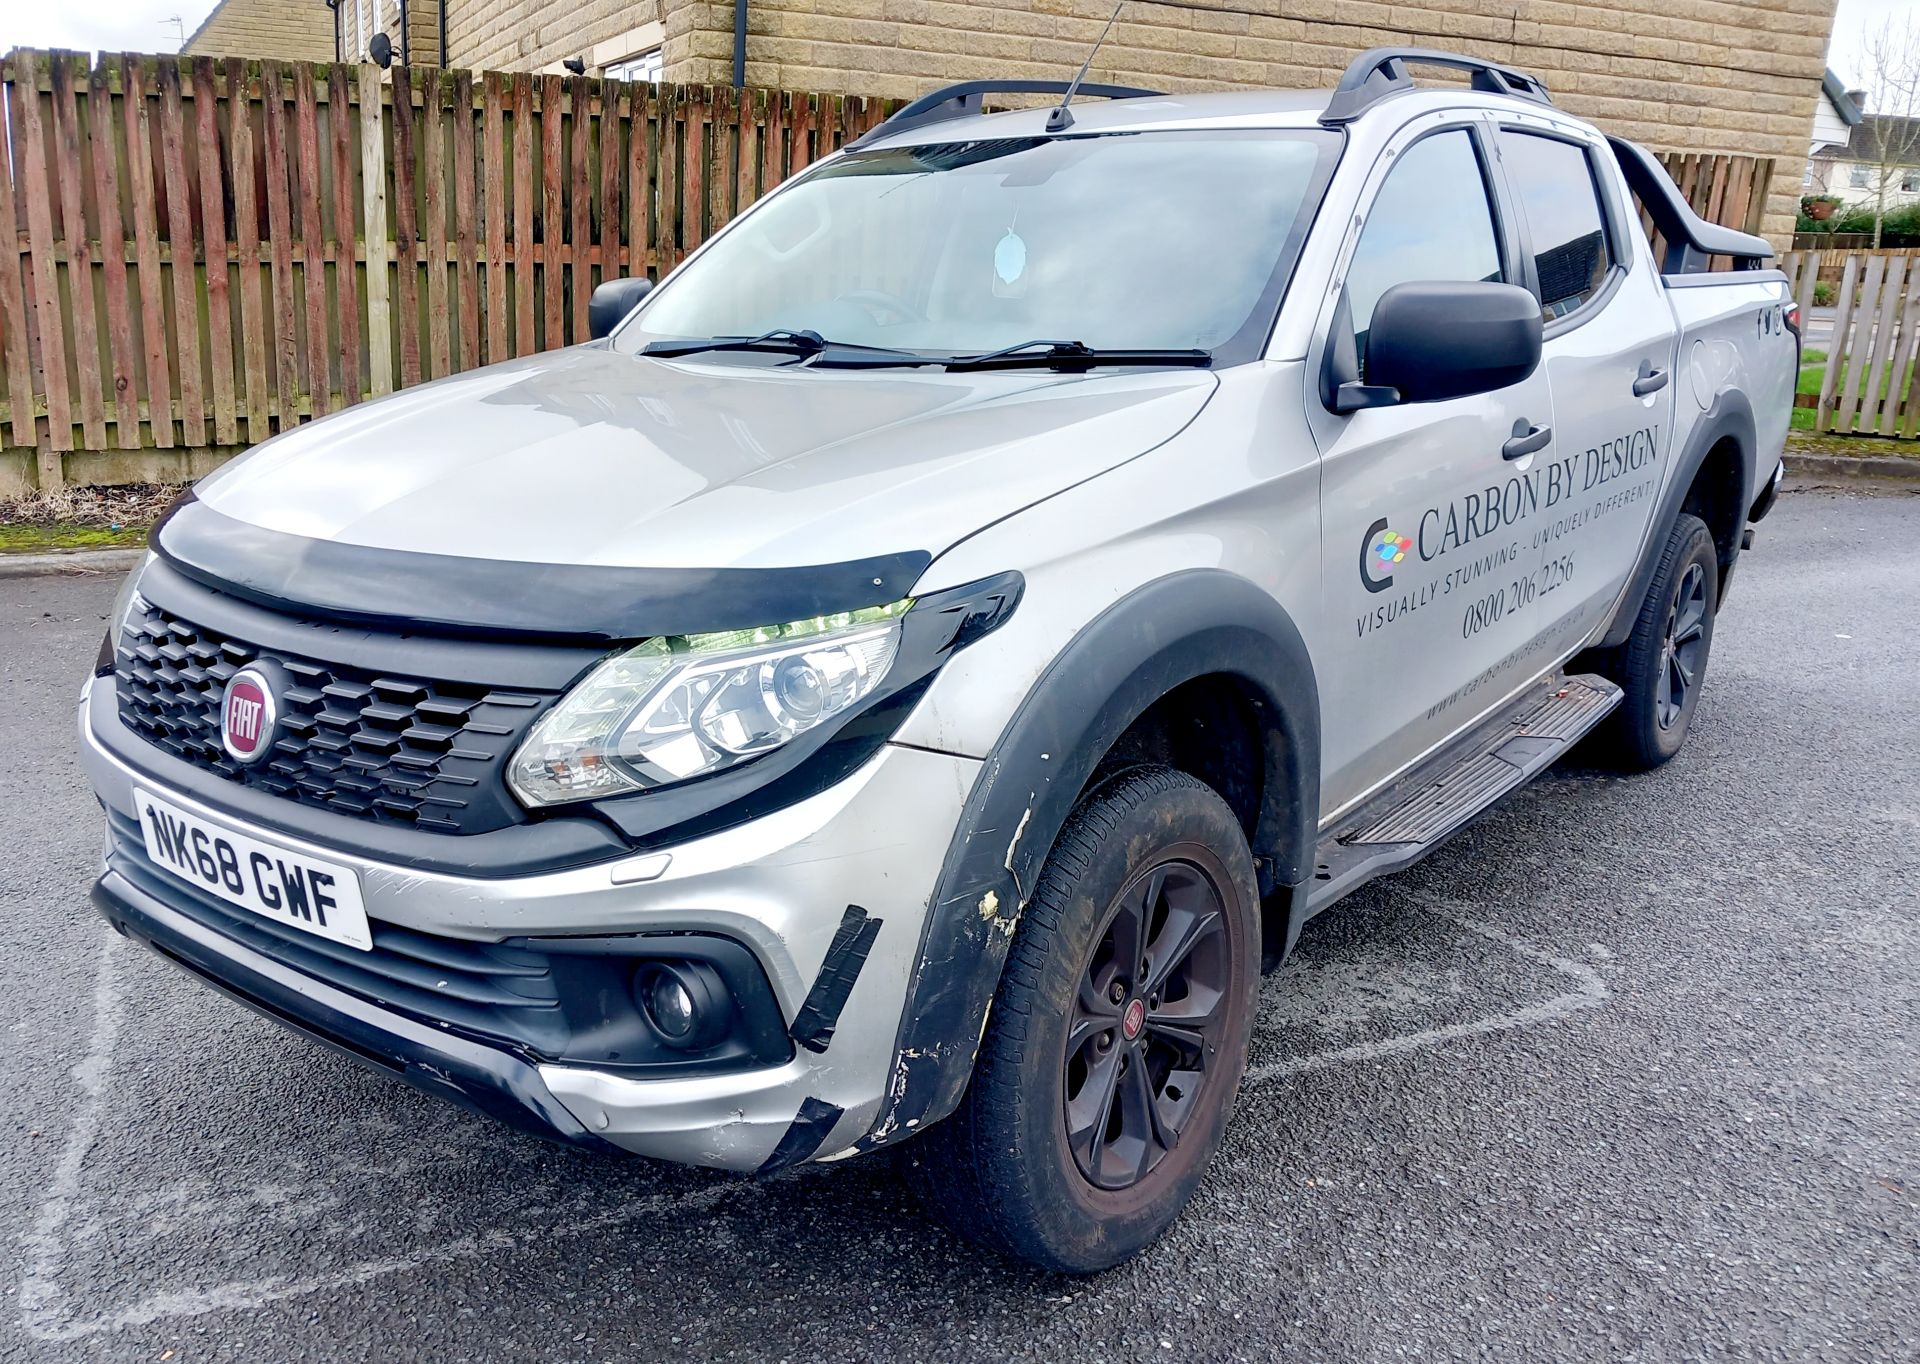 Fiat Fullback Diesel Special Edition 2.4 180hp Cross Double Cab Auto Pick Up, registration NK68 GWF,